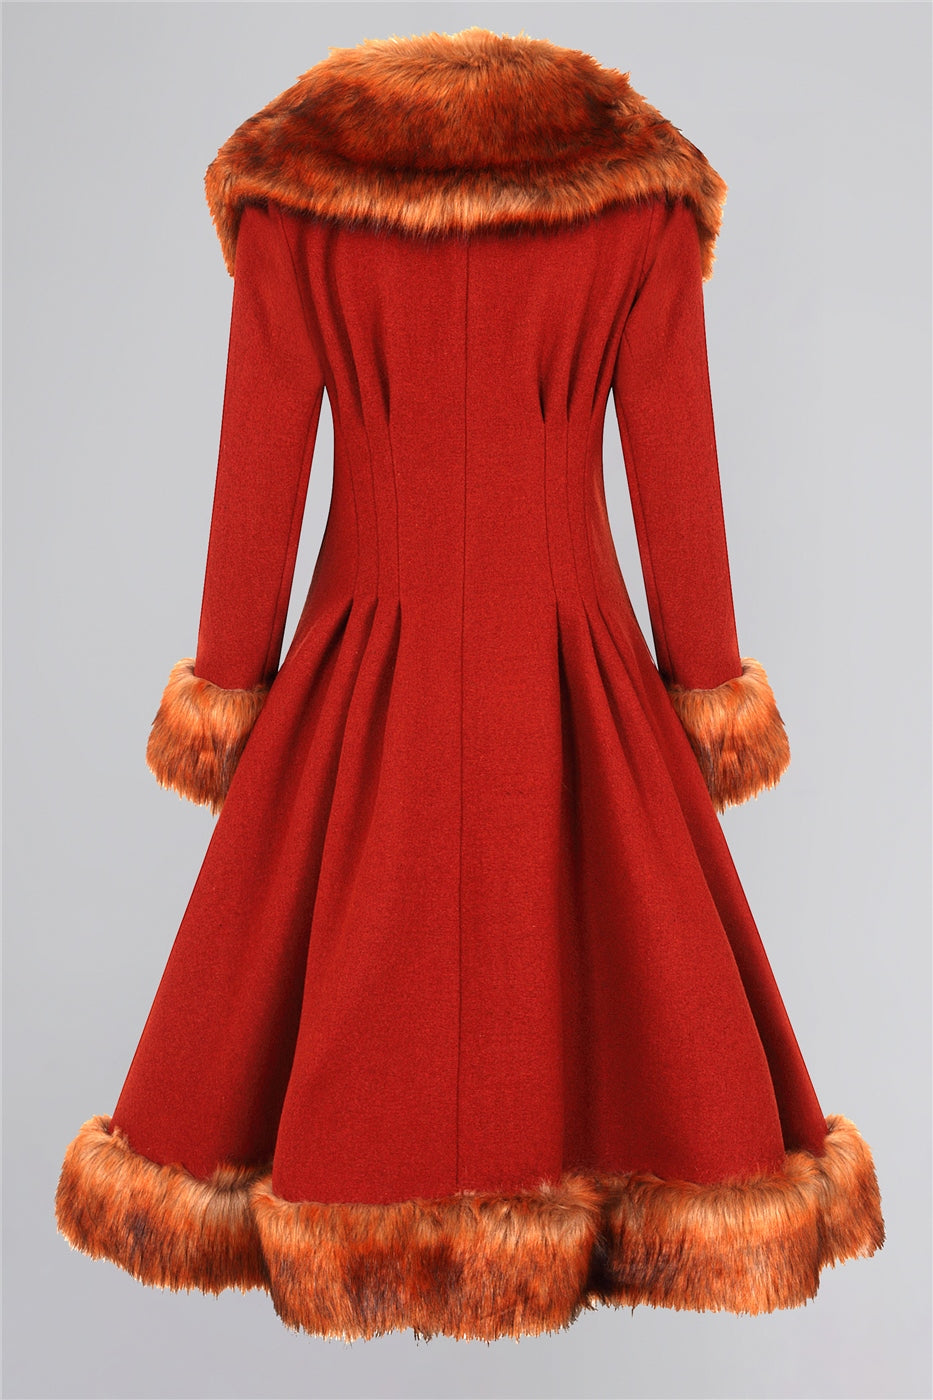 Pearl Coat in Burnt Orange by Collectif